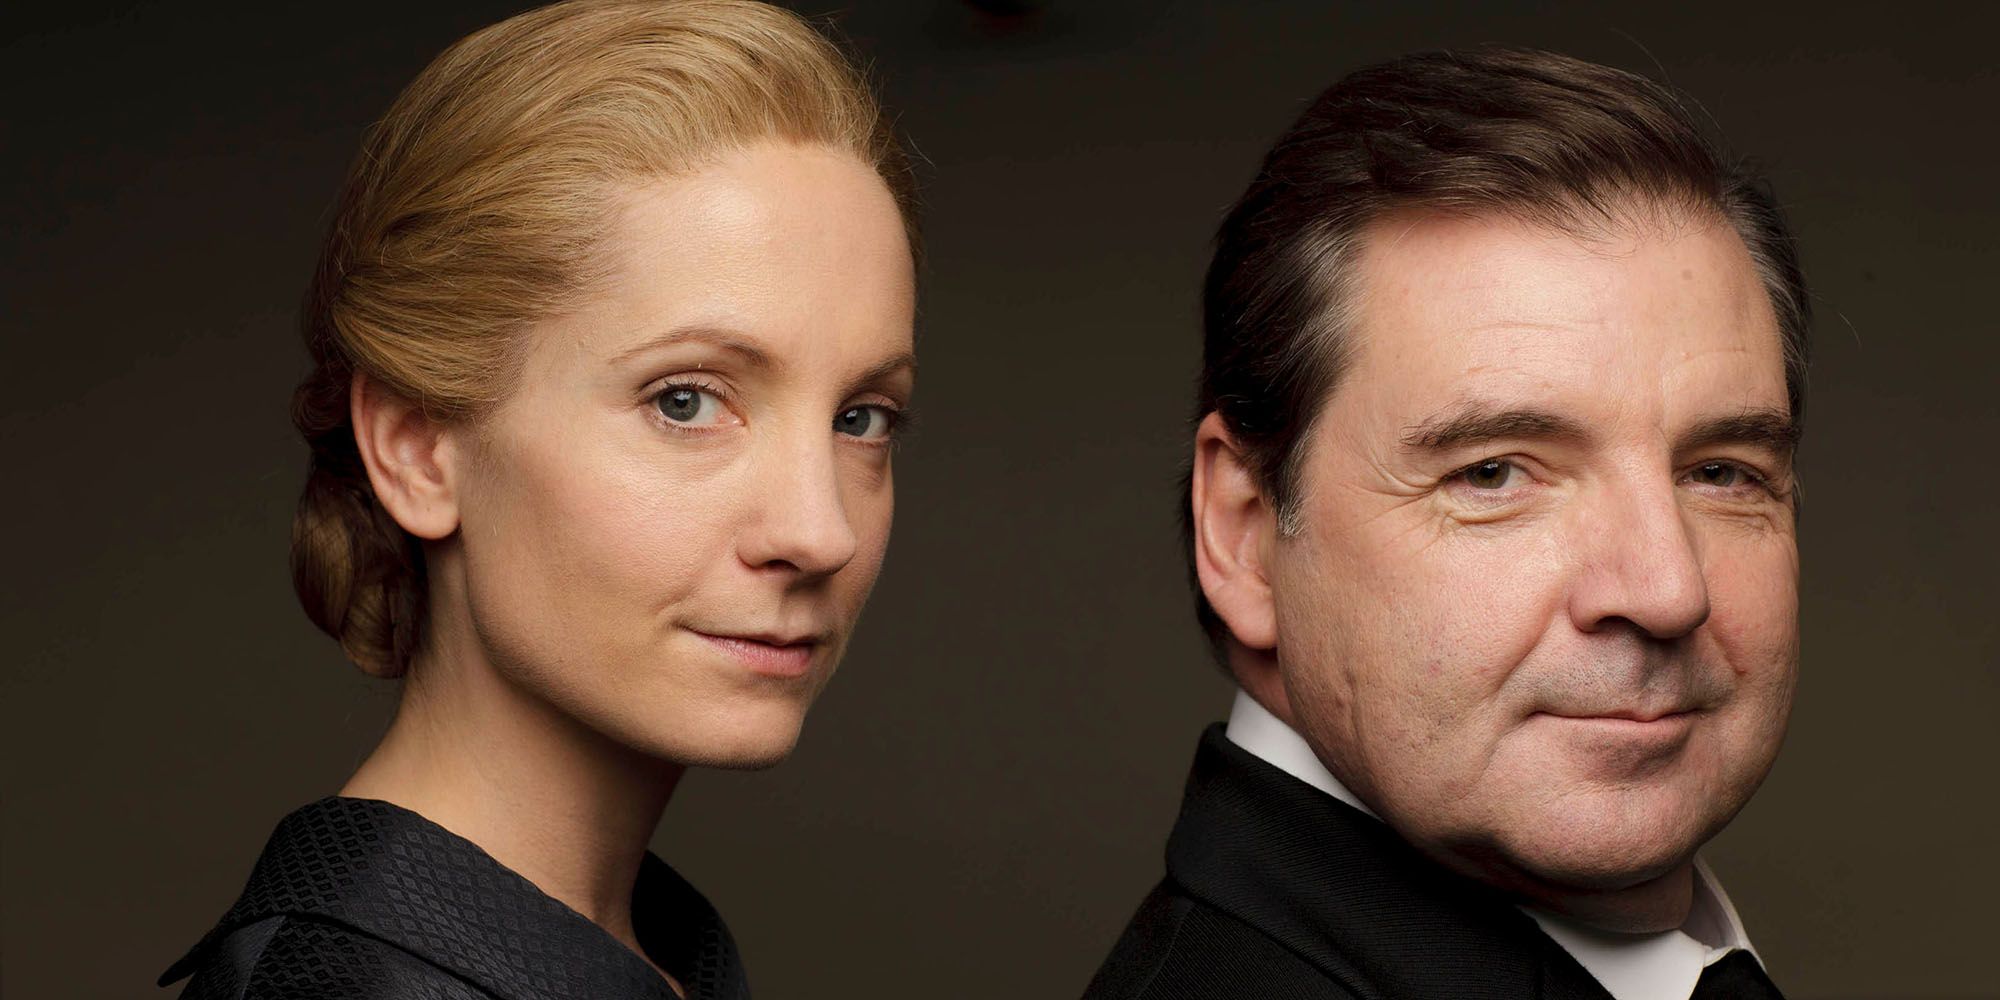 John and Anna Bates posing for the camera in a promo image for Downton Abbey